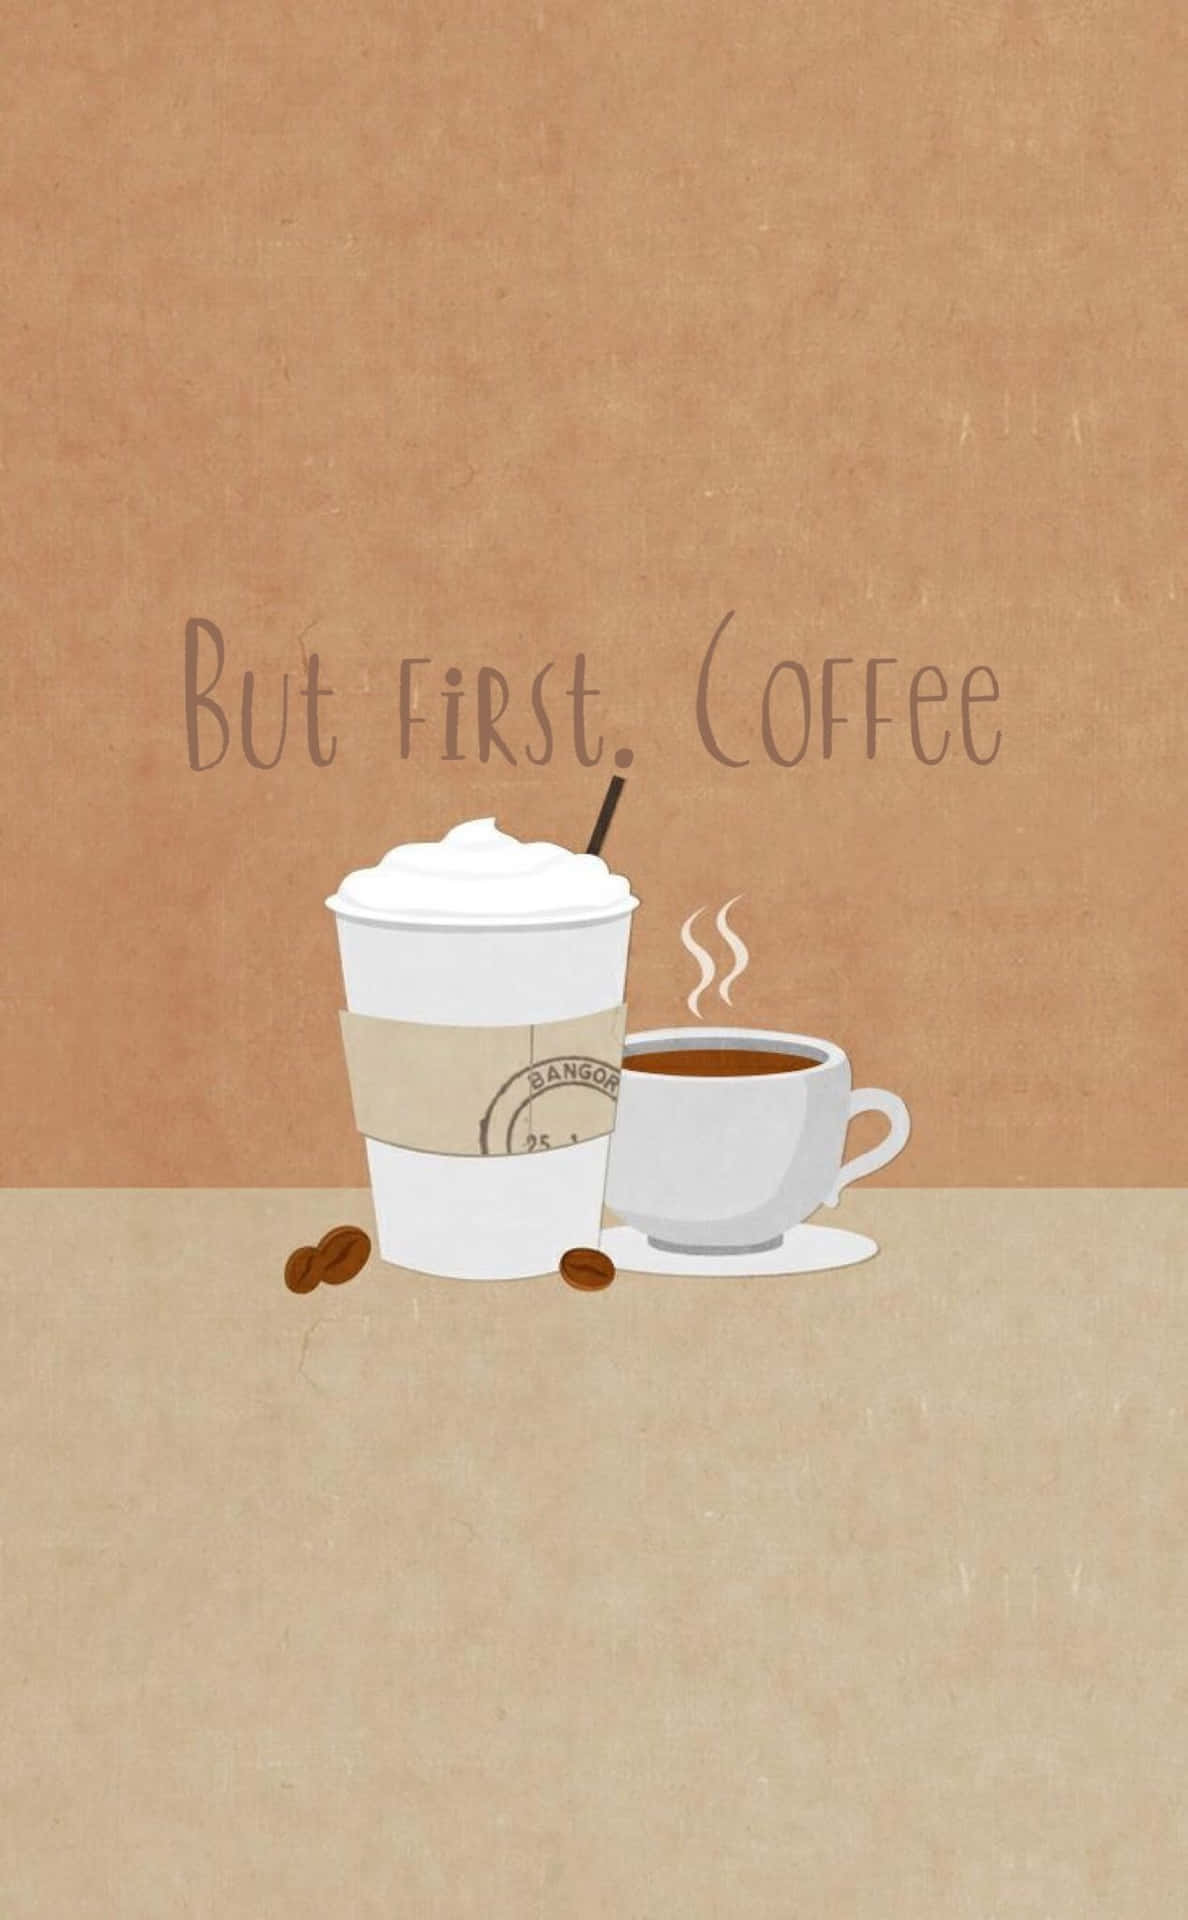 Get energized with this cute cup of coffee! Wallpaper